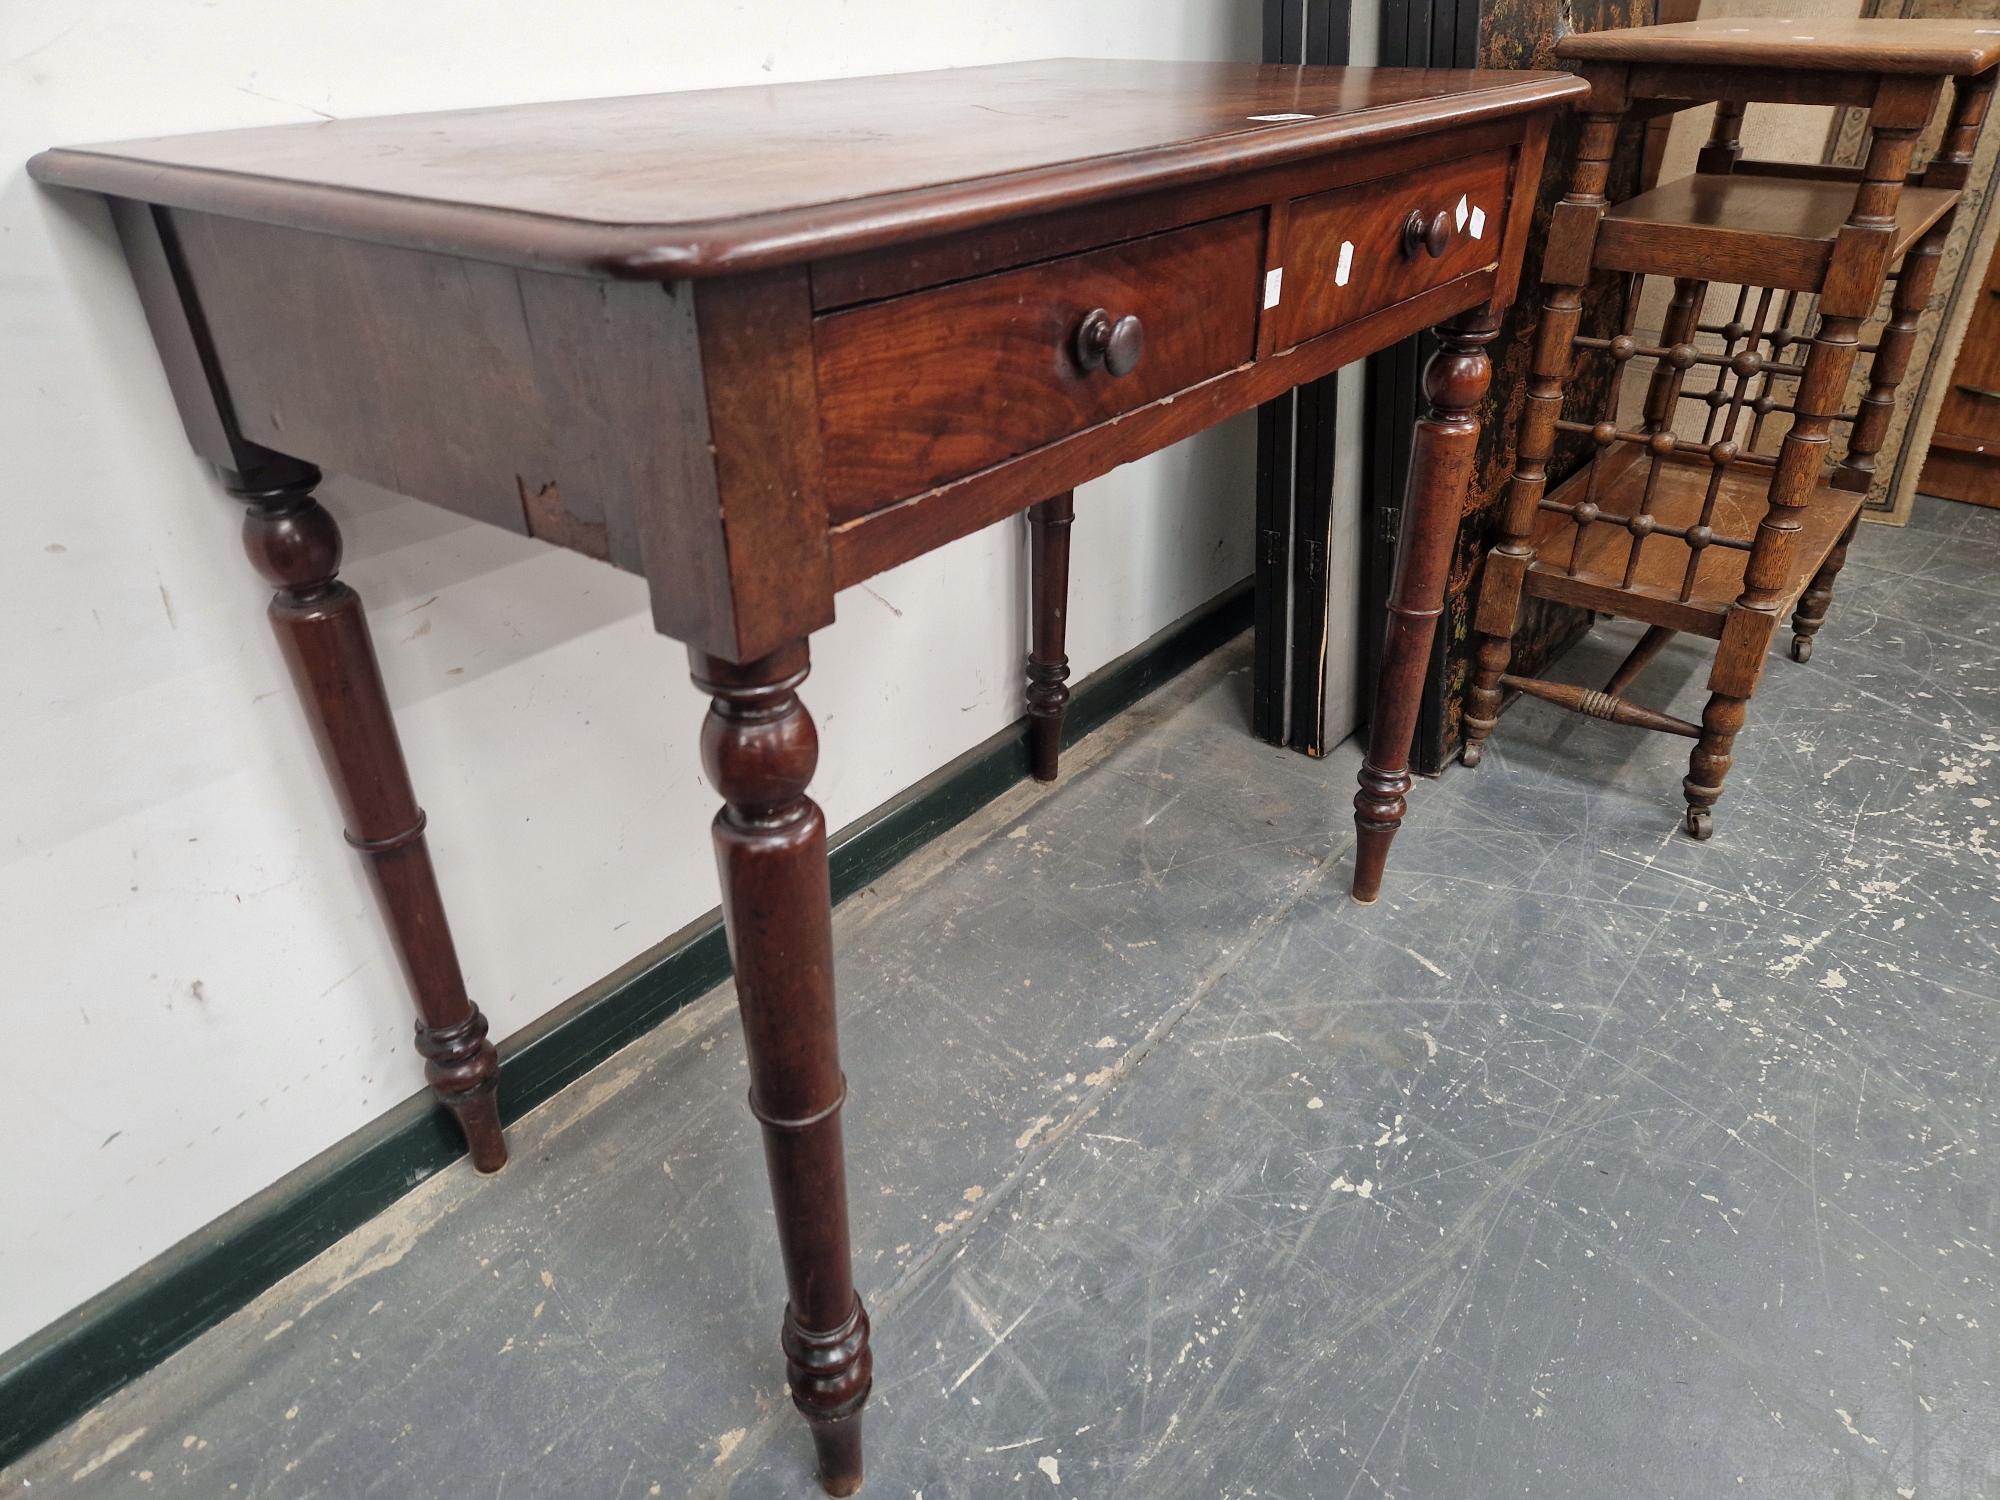 A 19th C. MAHOGANY TWO DRAWER TABLE WITH A RECTANGULAR TOP ON TURNED CYLINDRICAL LEGS WITH SPINDLE - Image 2 of 4